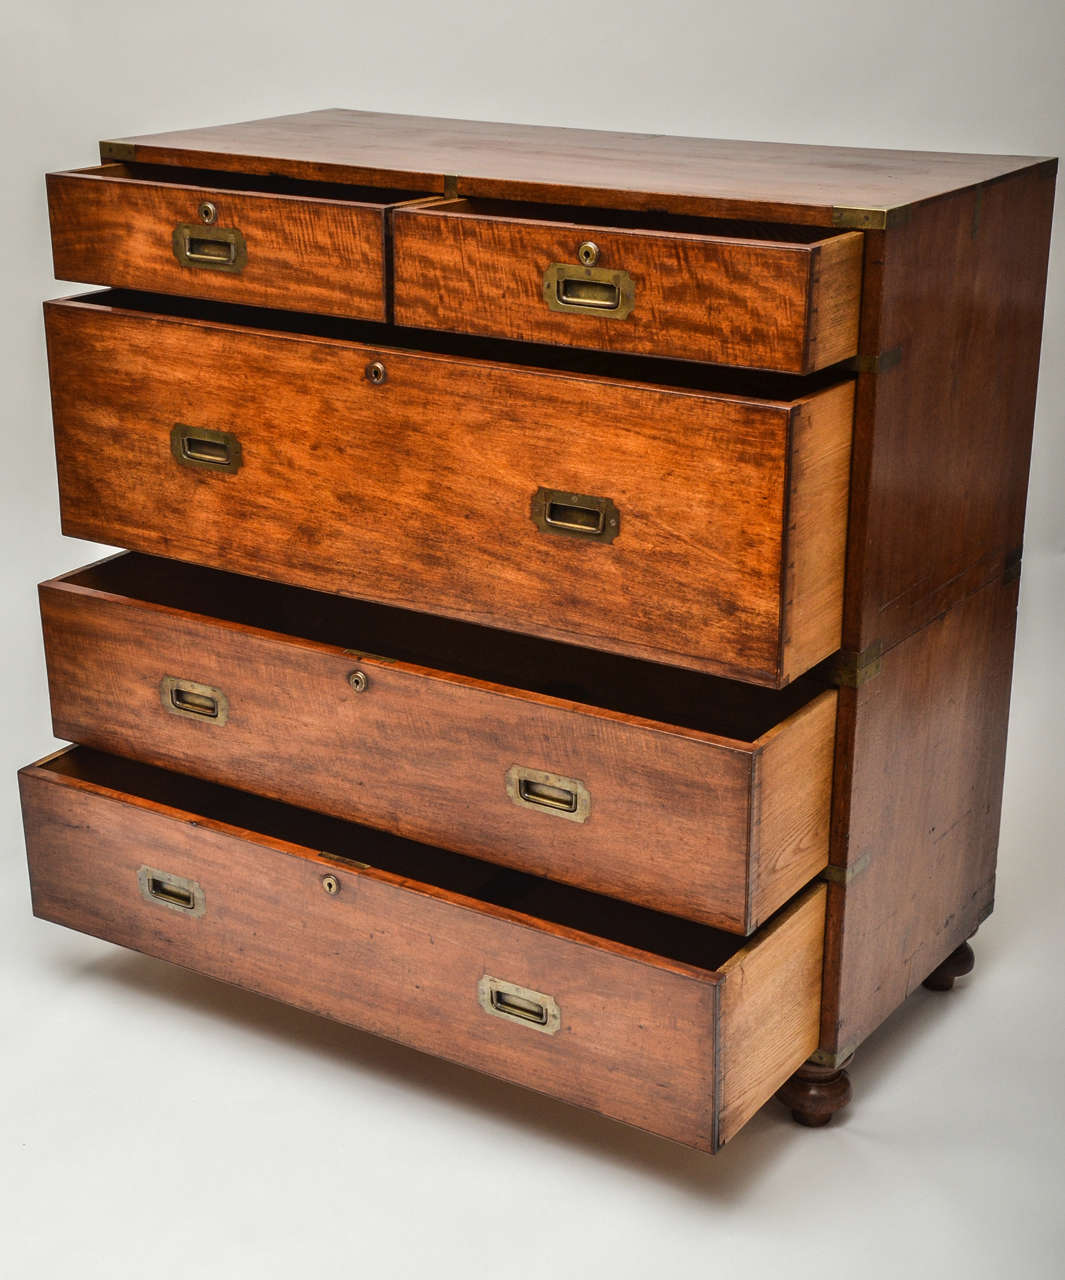 A 19th century mahogany Campaign chest, two part, original brass binding, brass locks and handles, turned feet.